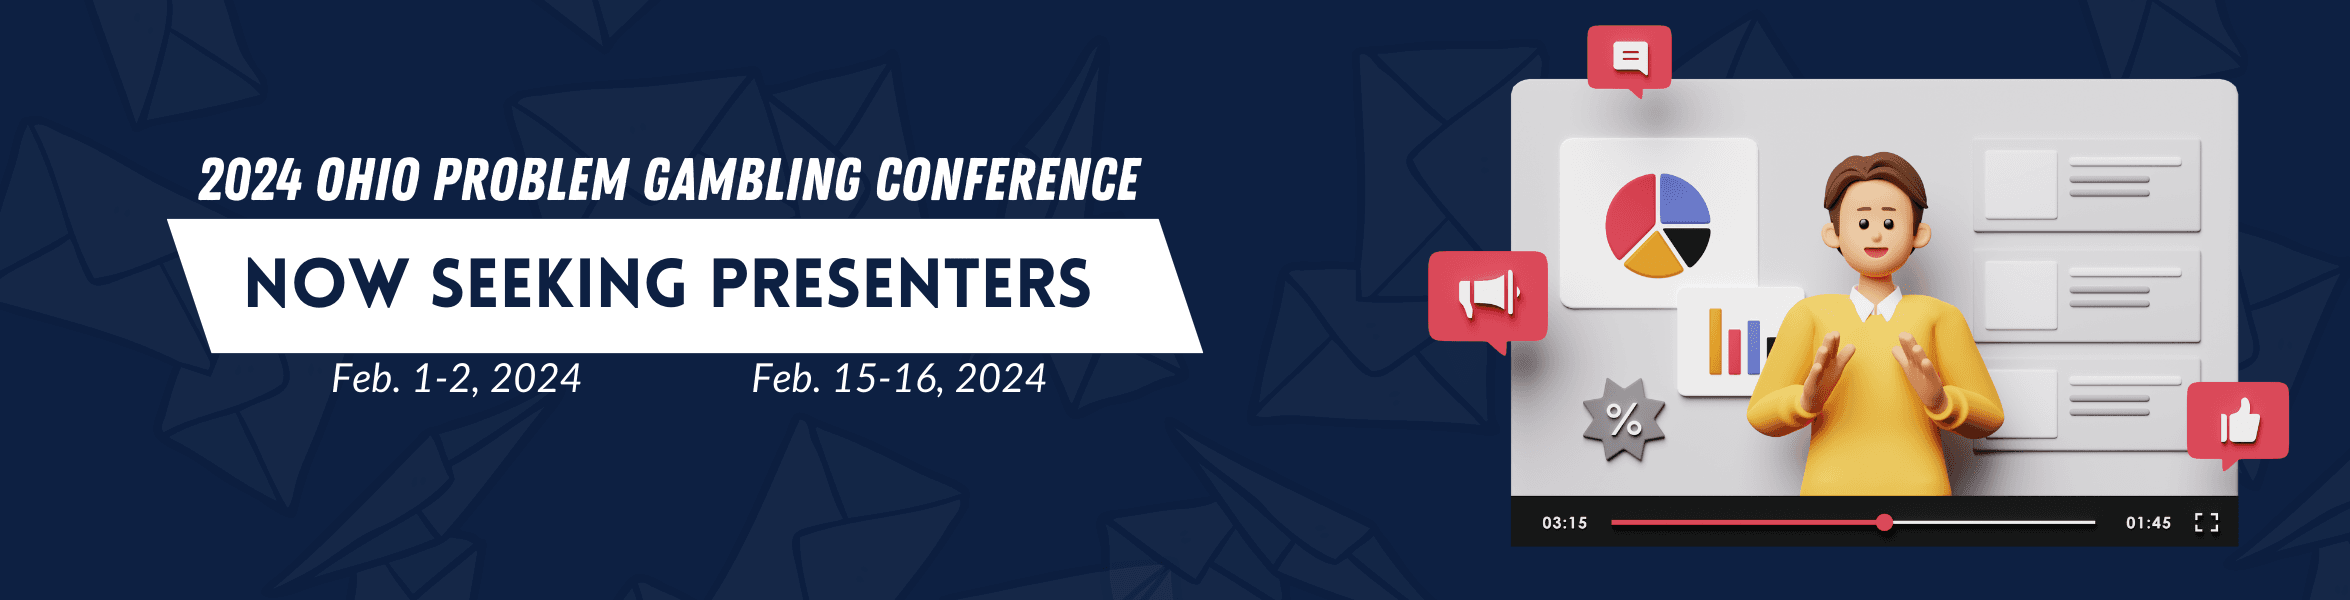 Conference proposals